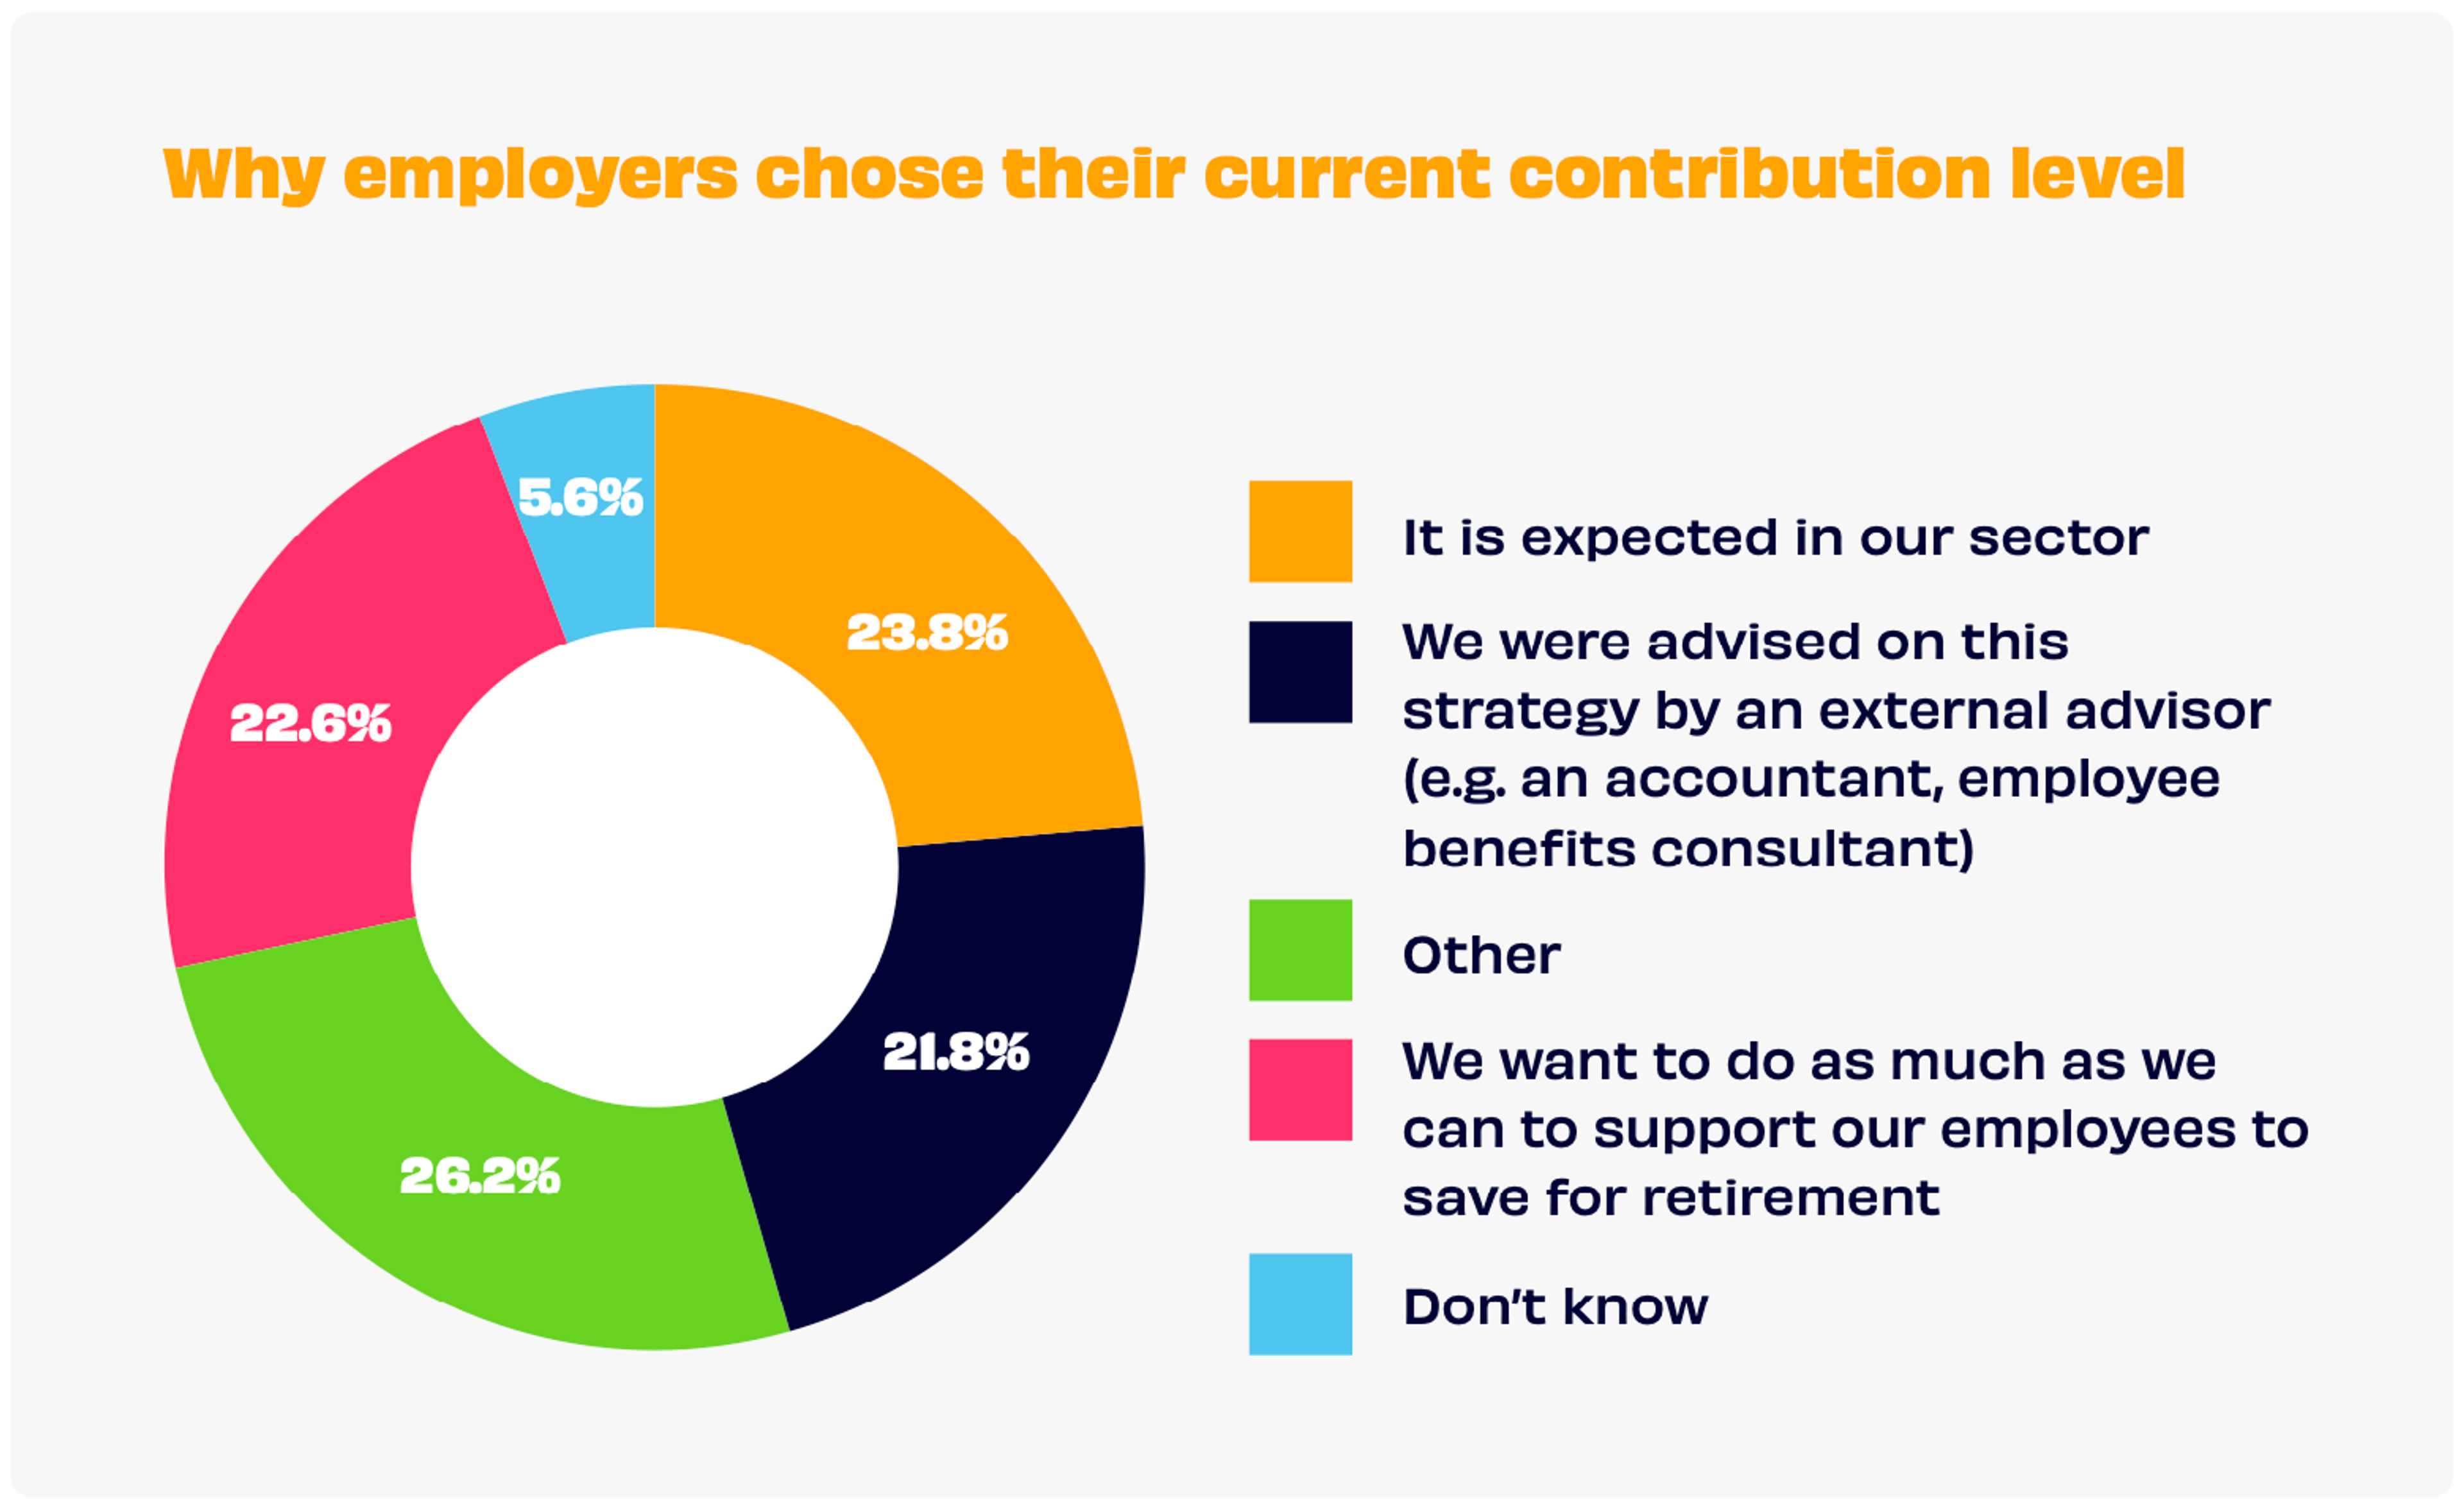 A pie chart showing why employers chose their current contribution level